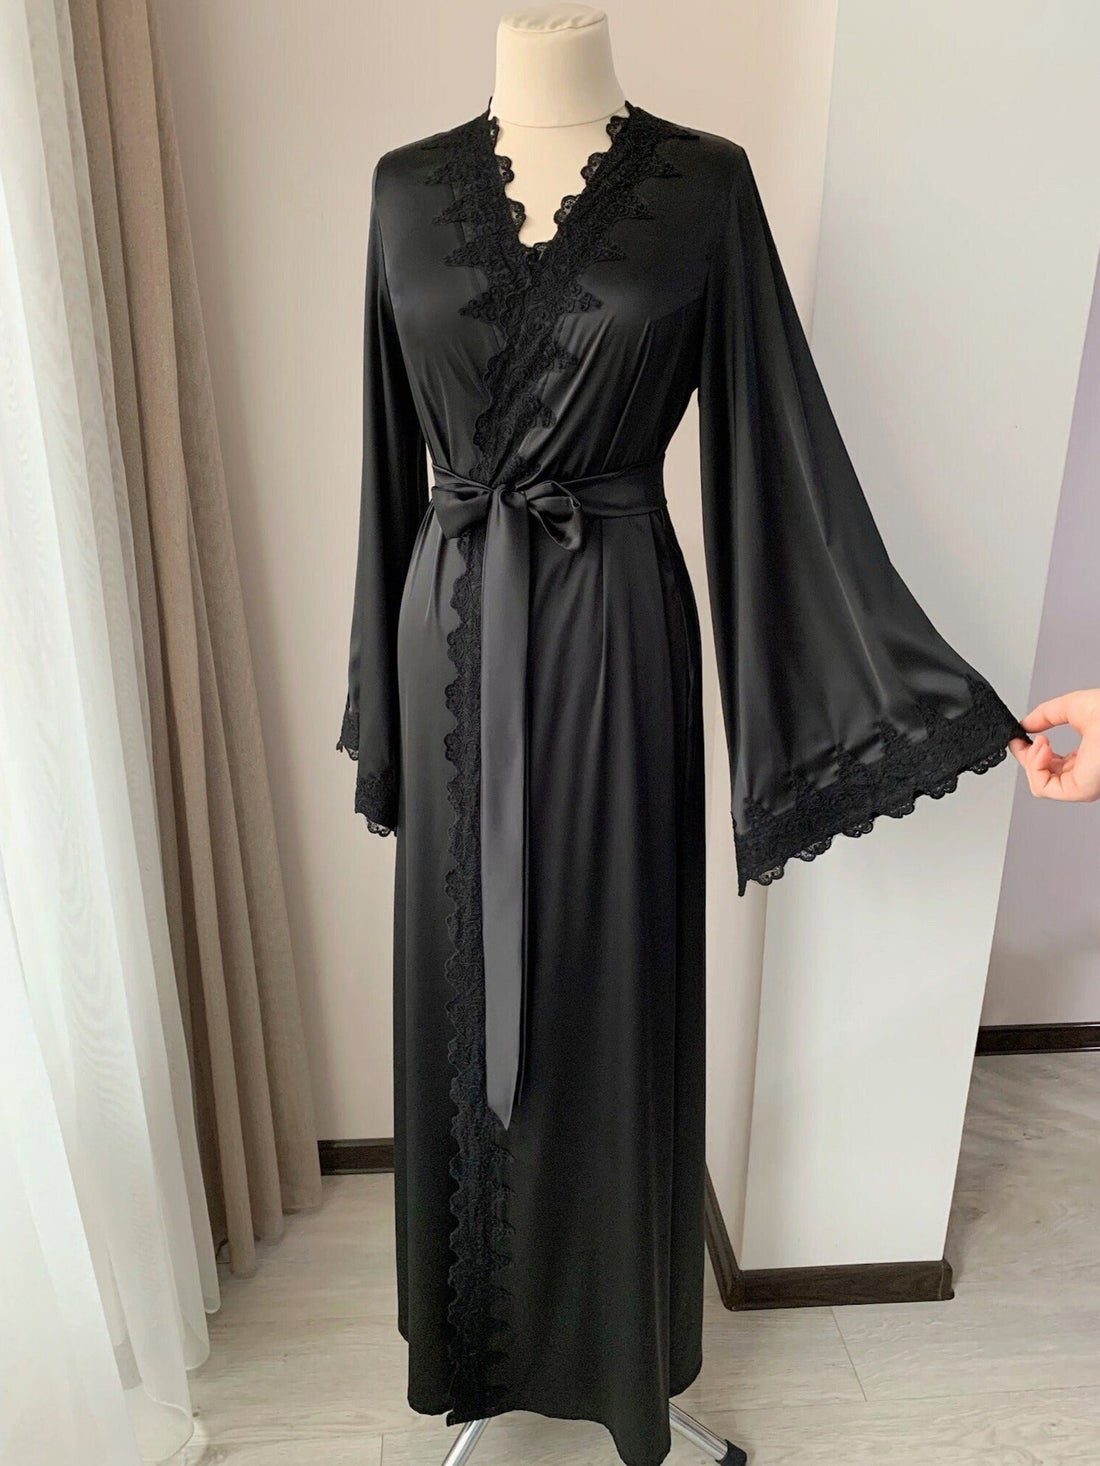 Long black robe with lace